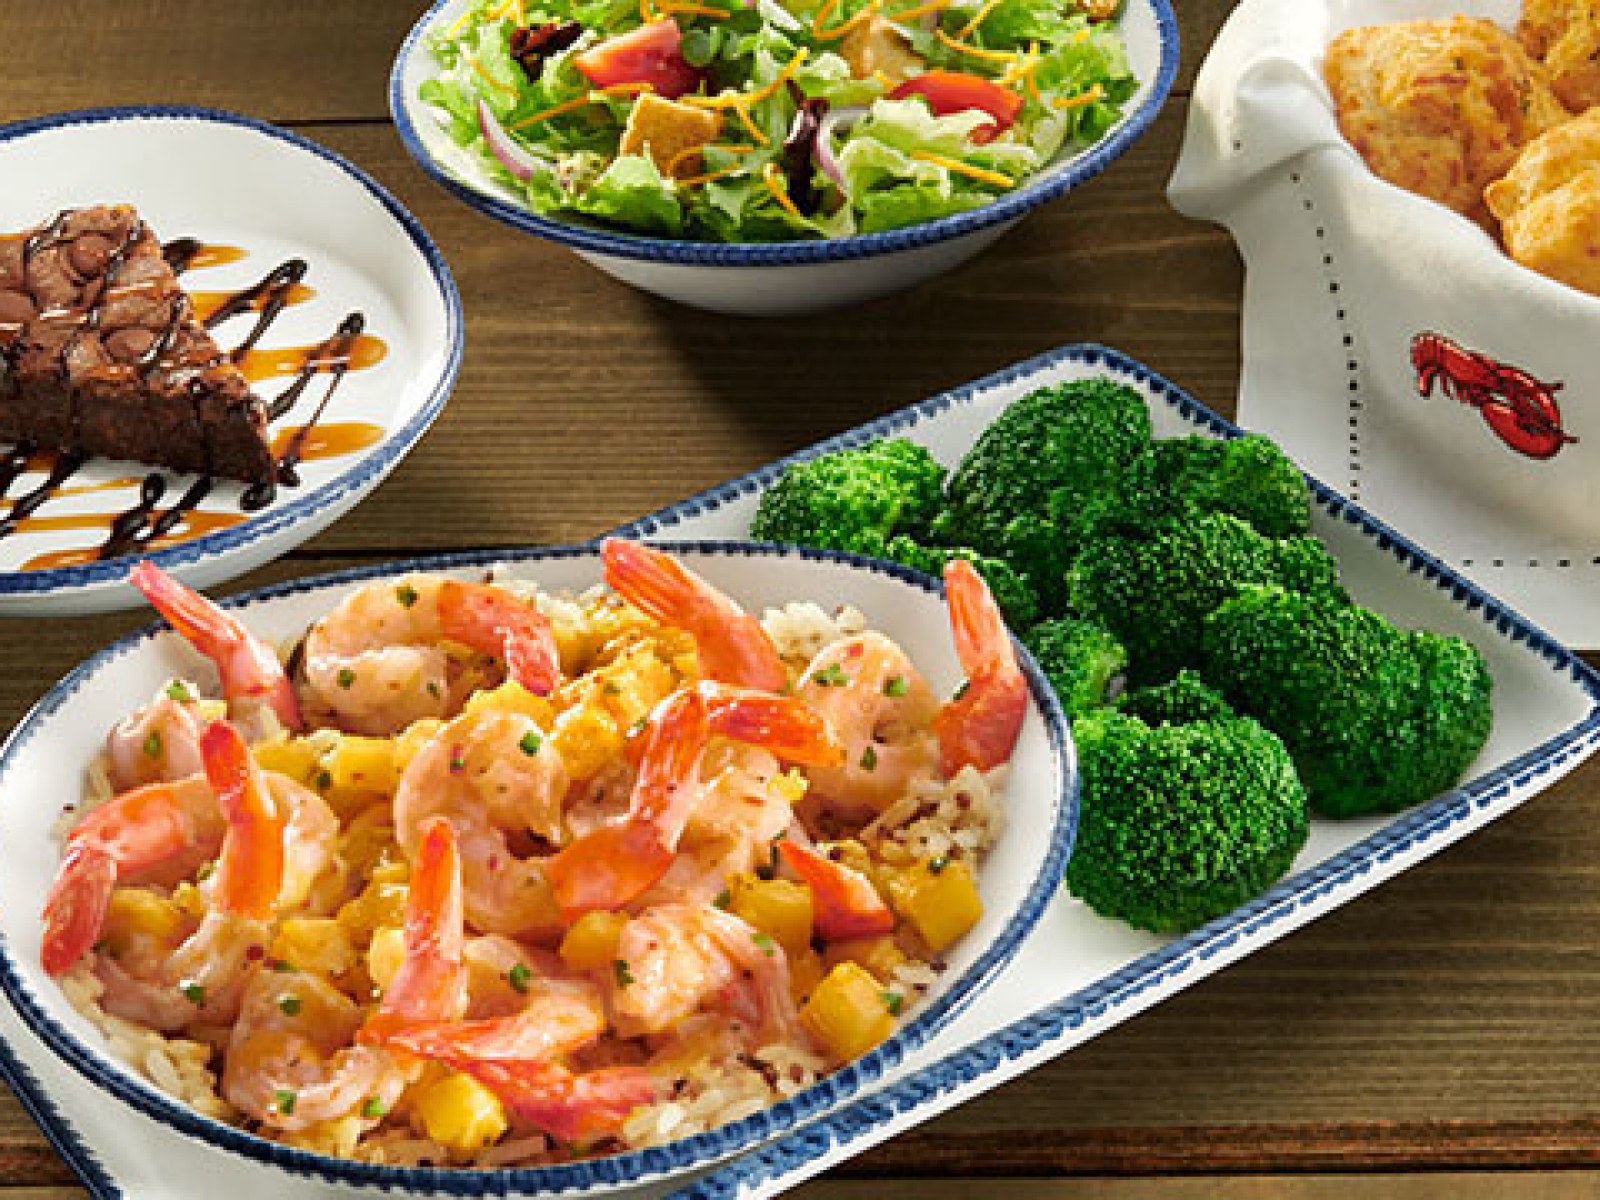 Red Lobster Now Has A 3 Course Shrimp Feast Meal Deal With New Menu Items For 14 99 [ 1200 x 1600 Pixel ]